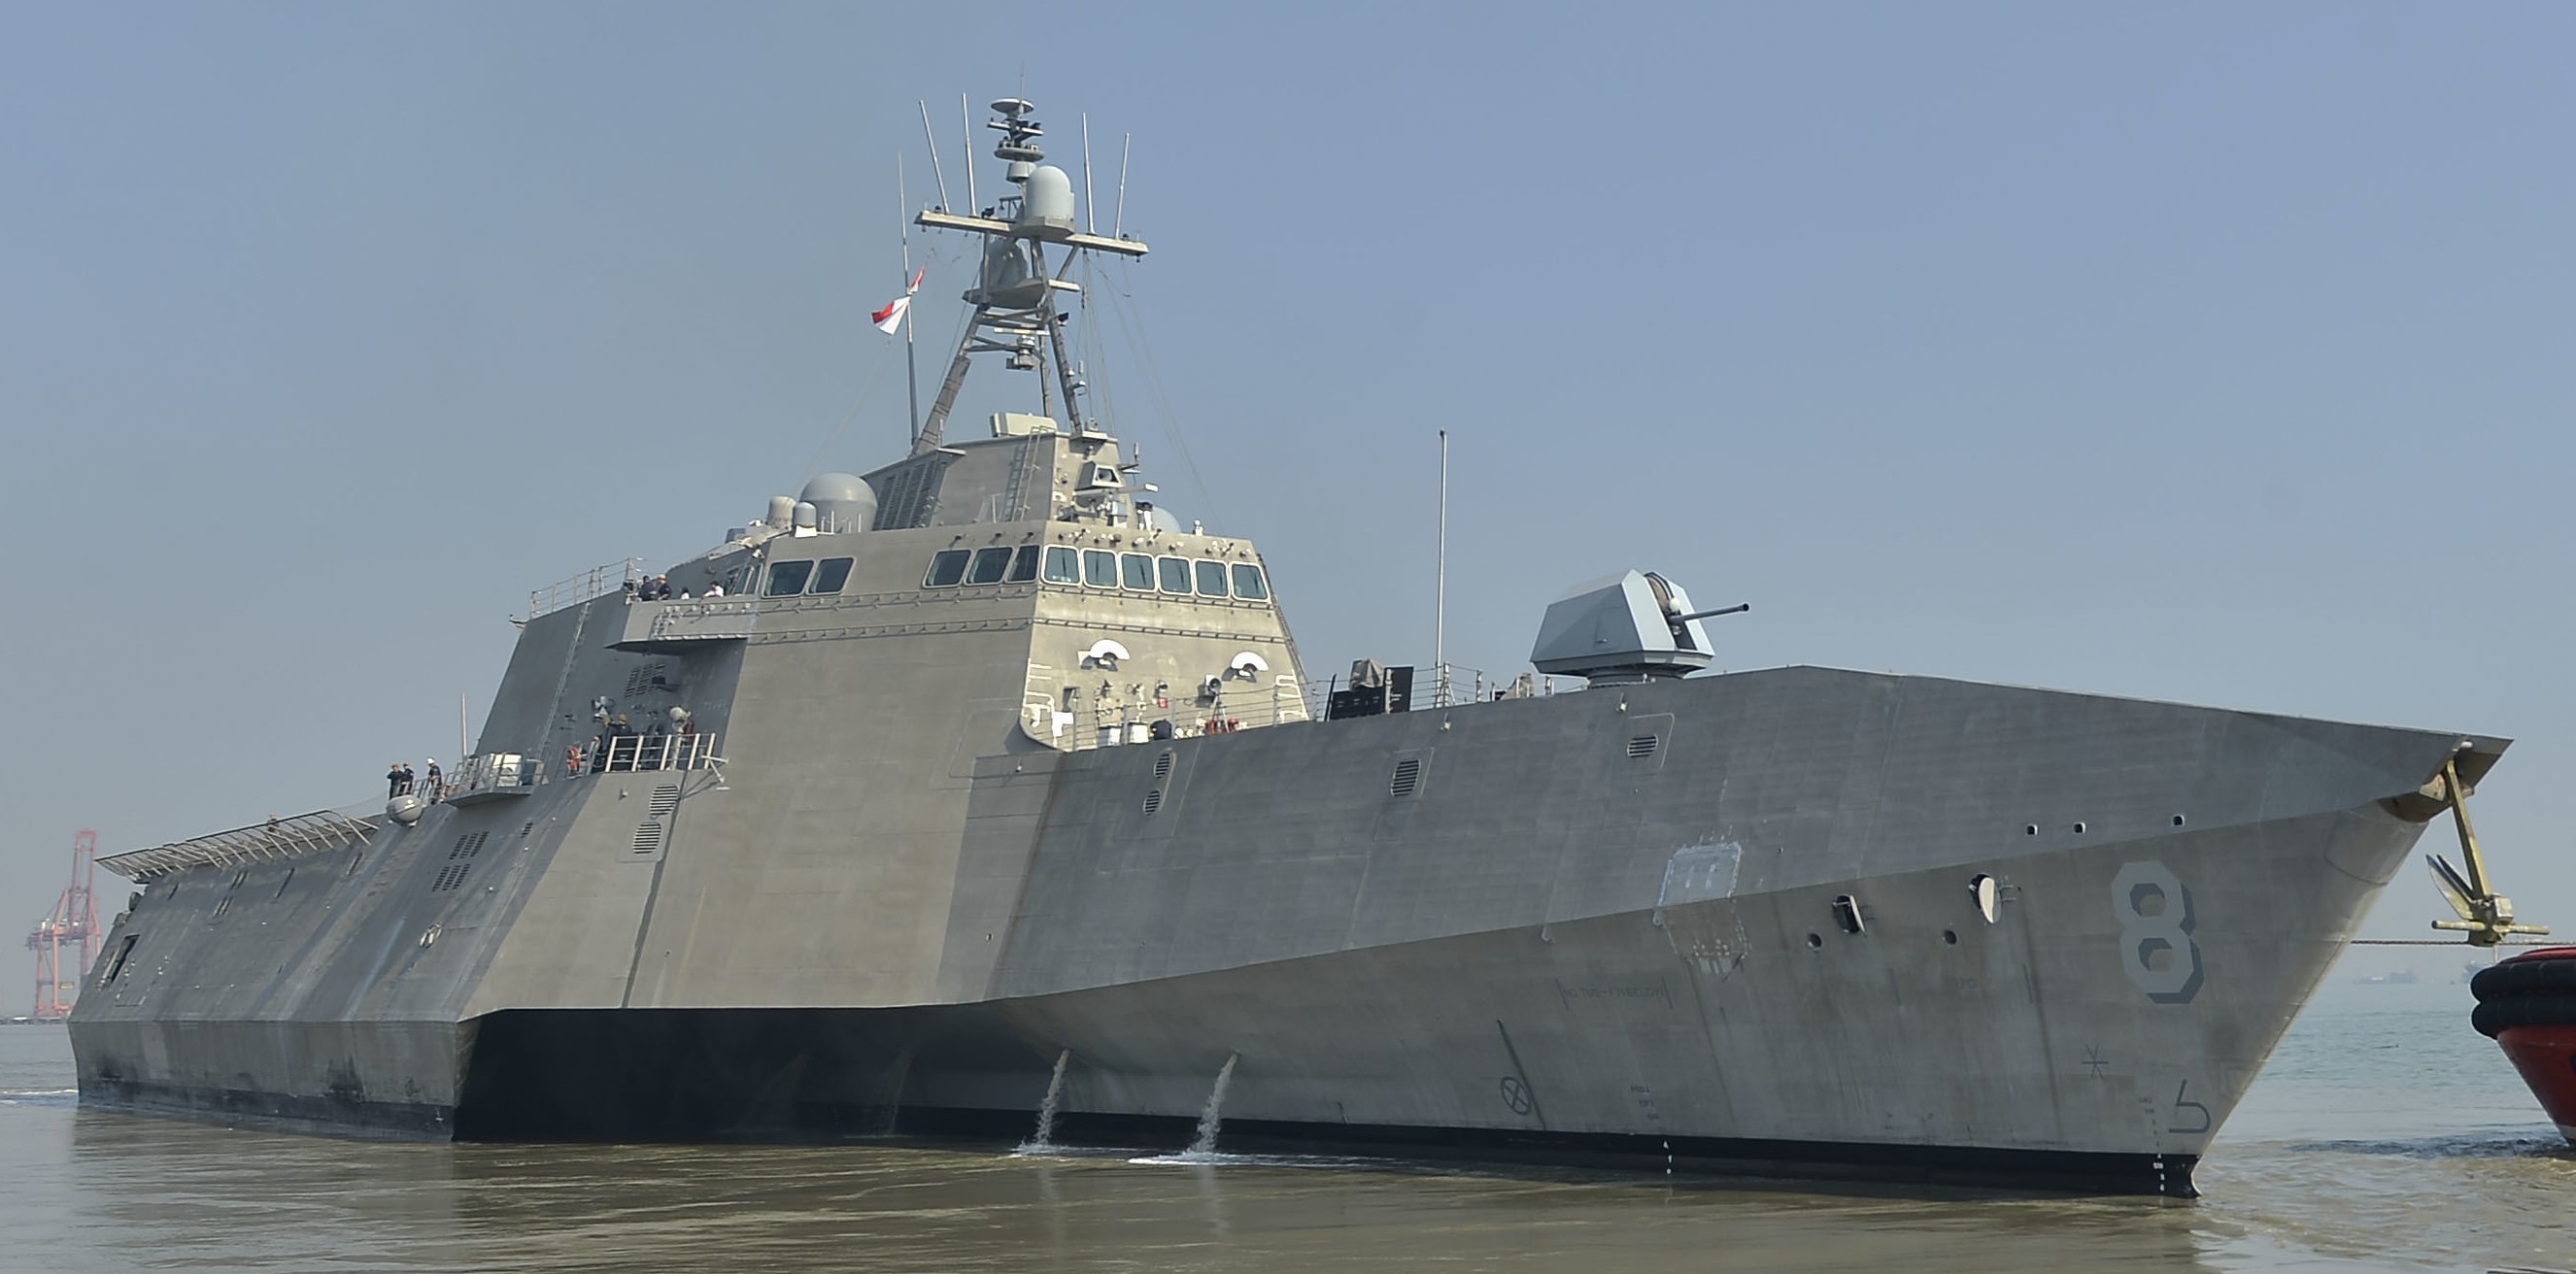 lcs-8 uss montgomery independence class littoral combat ship us navy 39 carat exercise indonesia